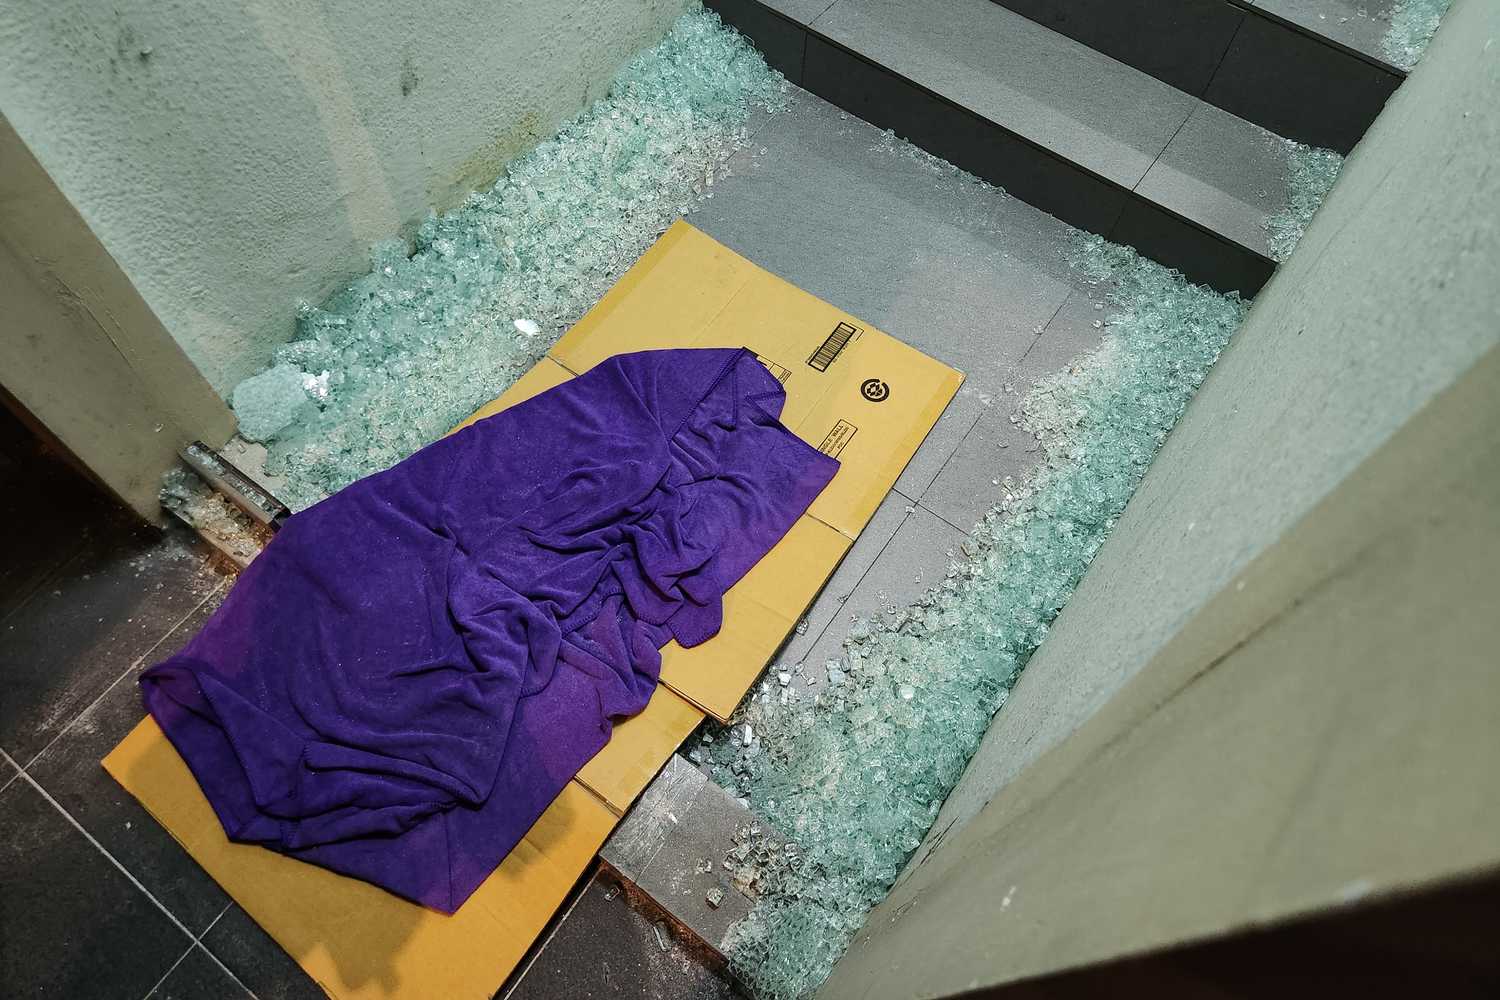 an image of a broken glass door shattered on the floor, with a cardboard placed on it for officers to walk across